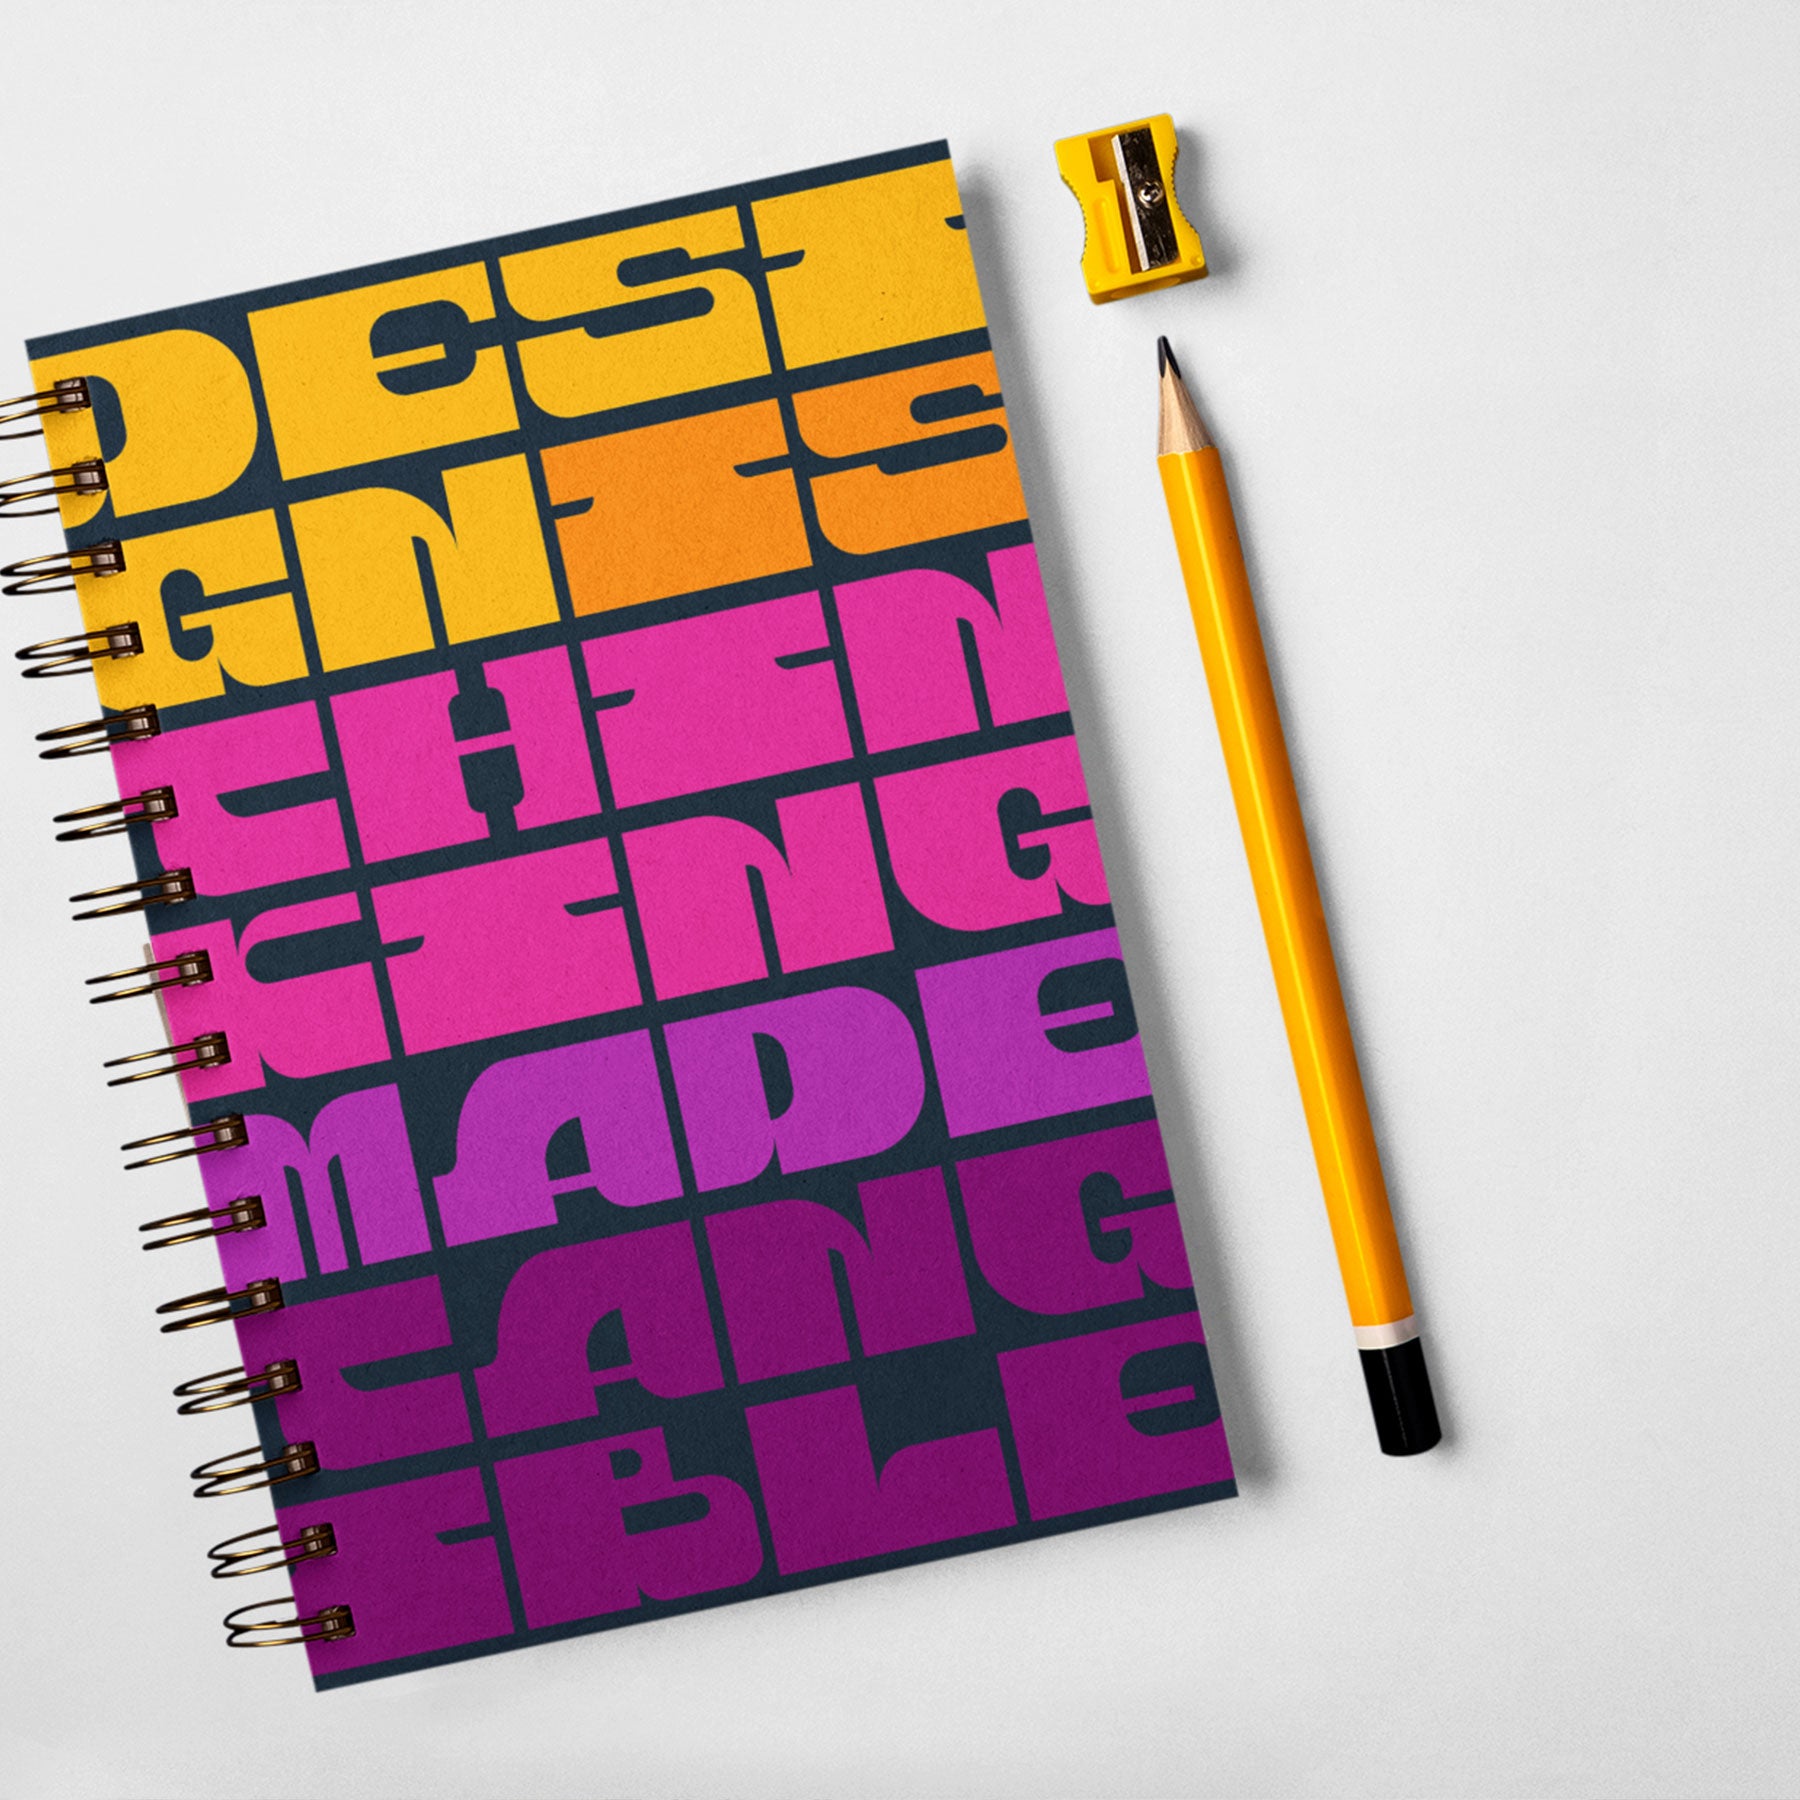 A colorful spiral bound notebook with yellow, pink, and purple typography.